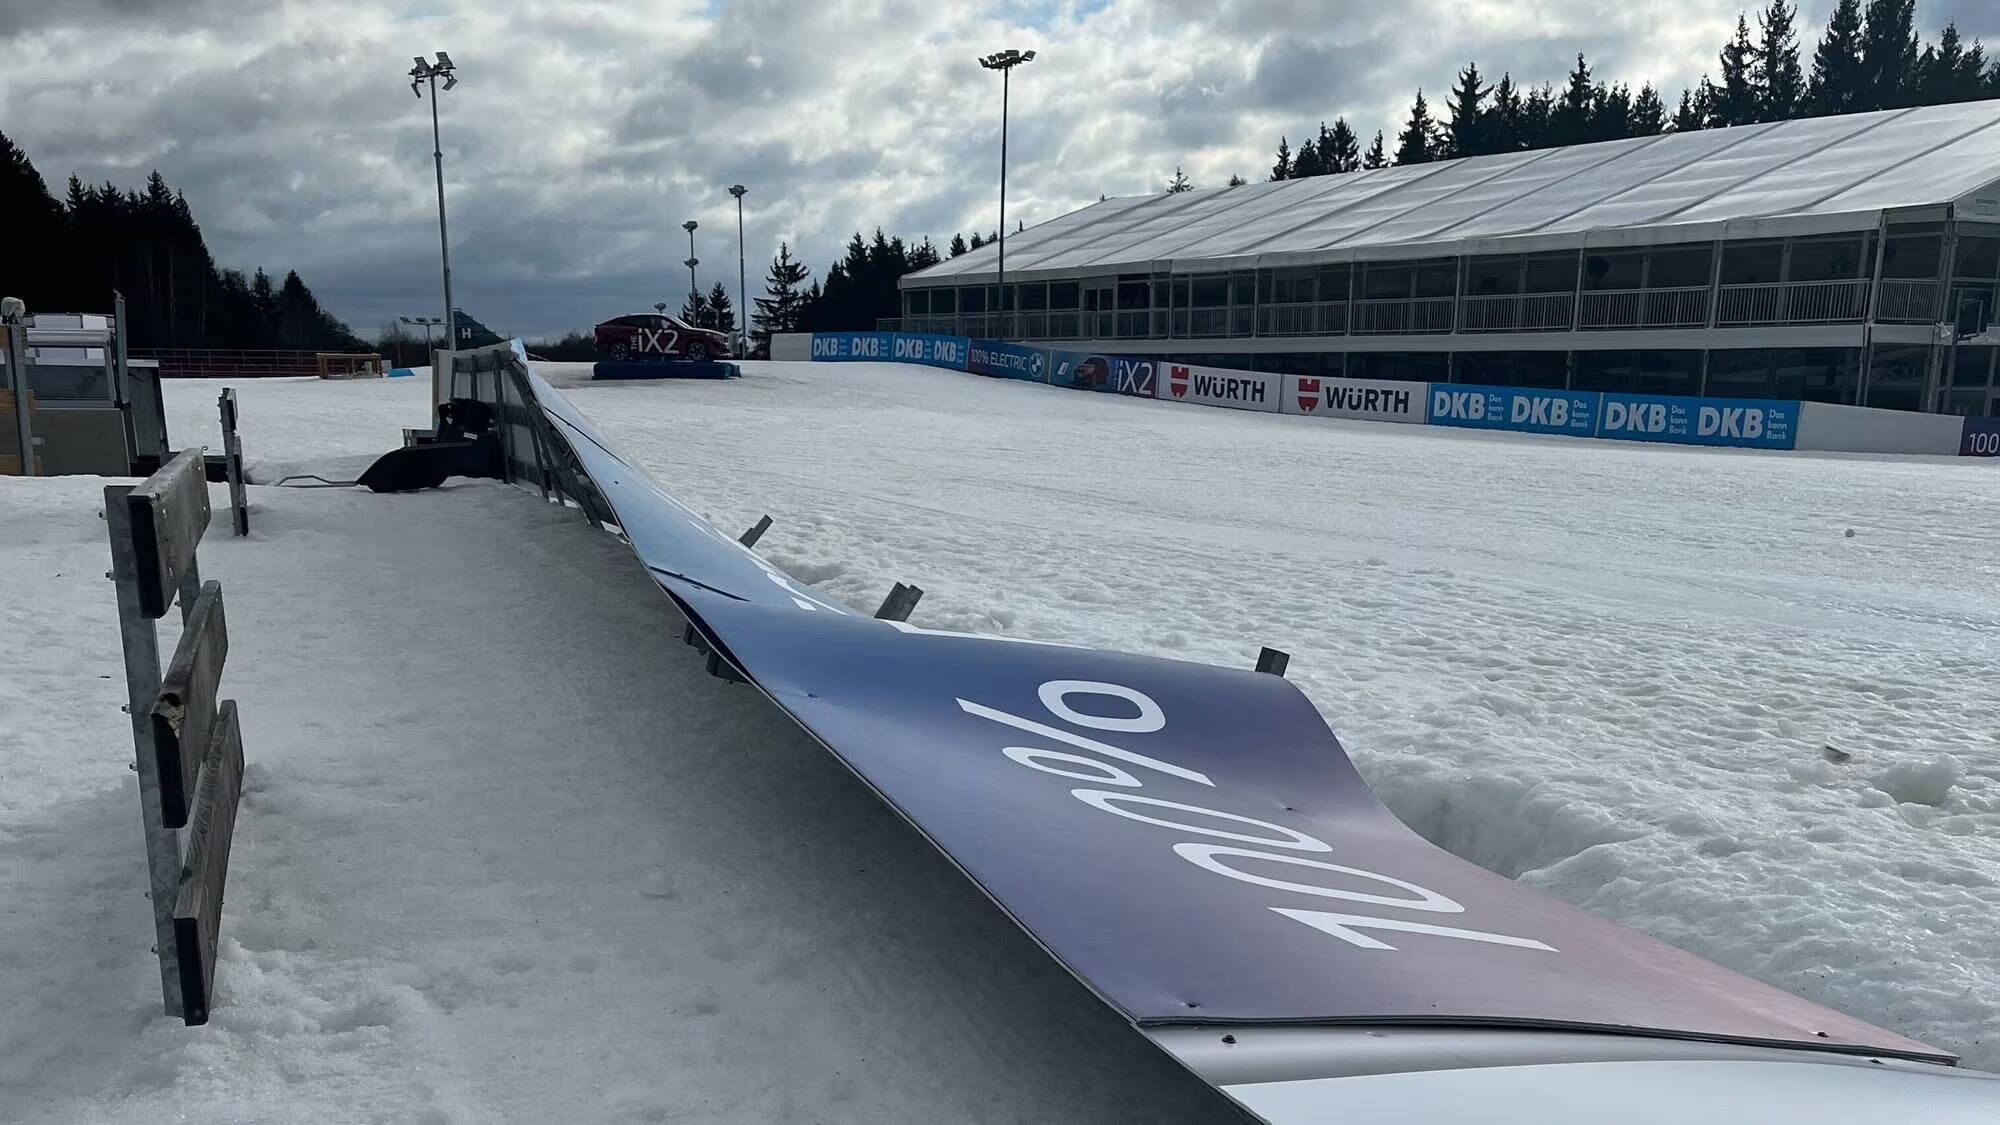 ''There have never been such conditions before'': the leader of the Ukrainian biathlon team tells about the horror at the World Championships